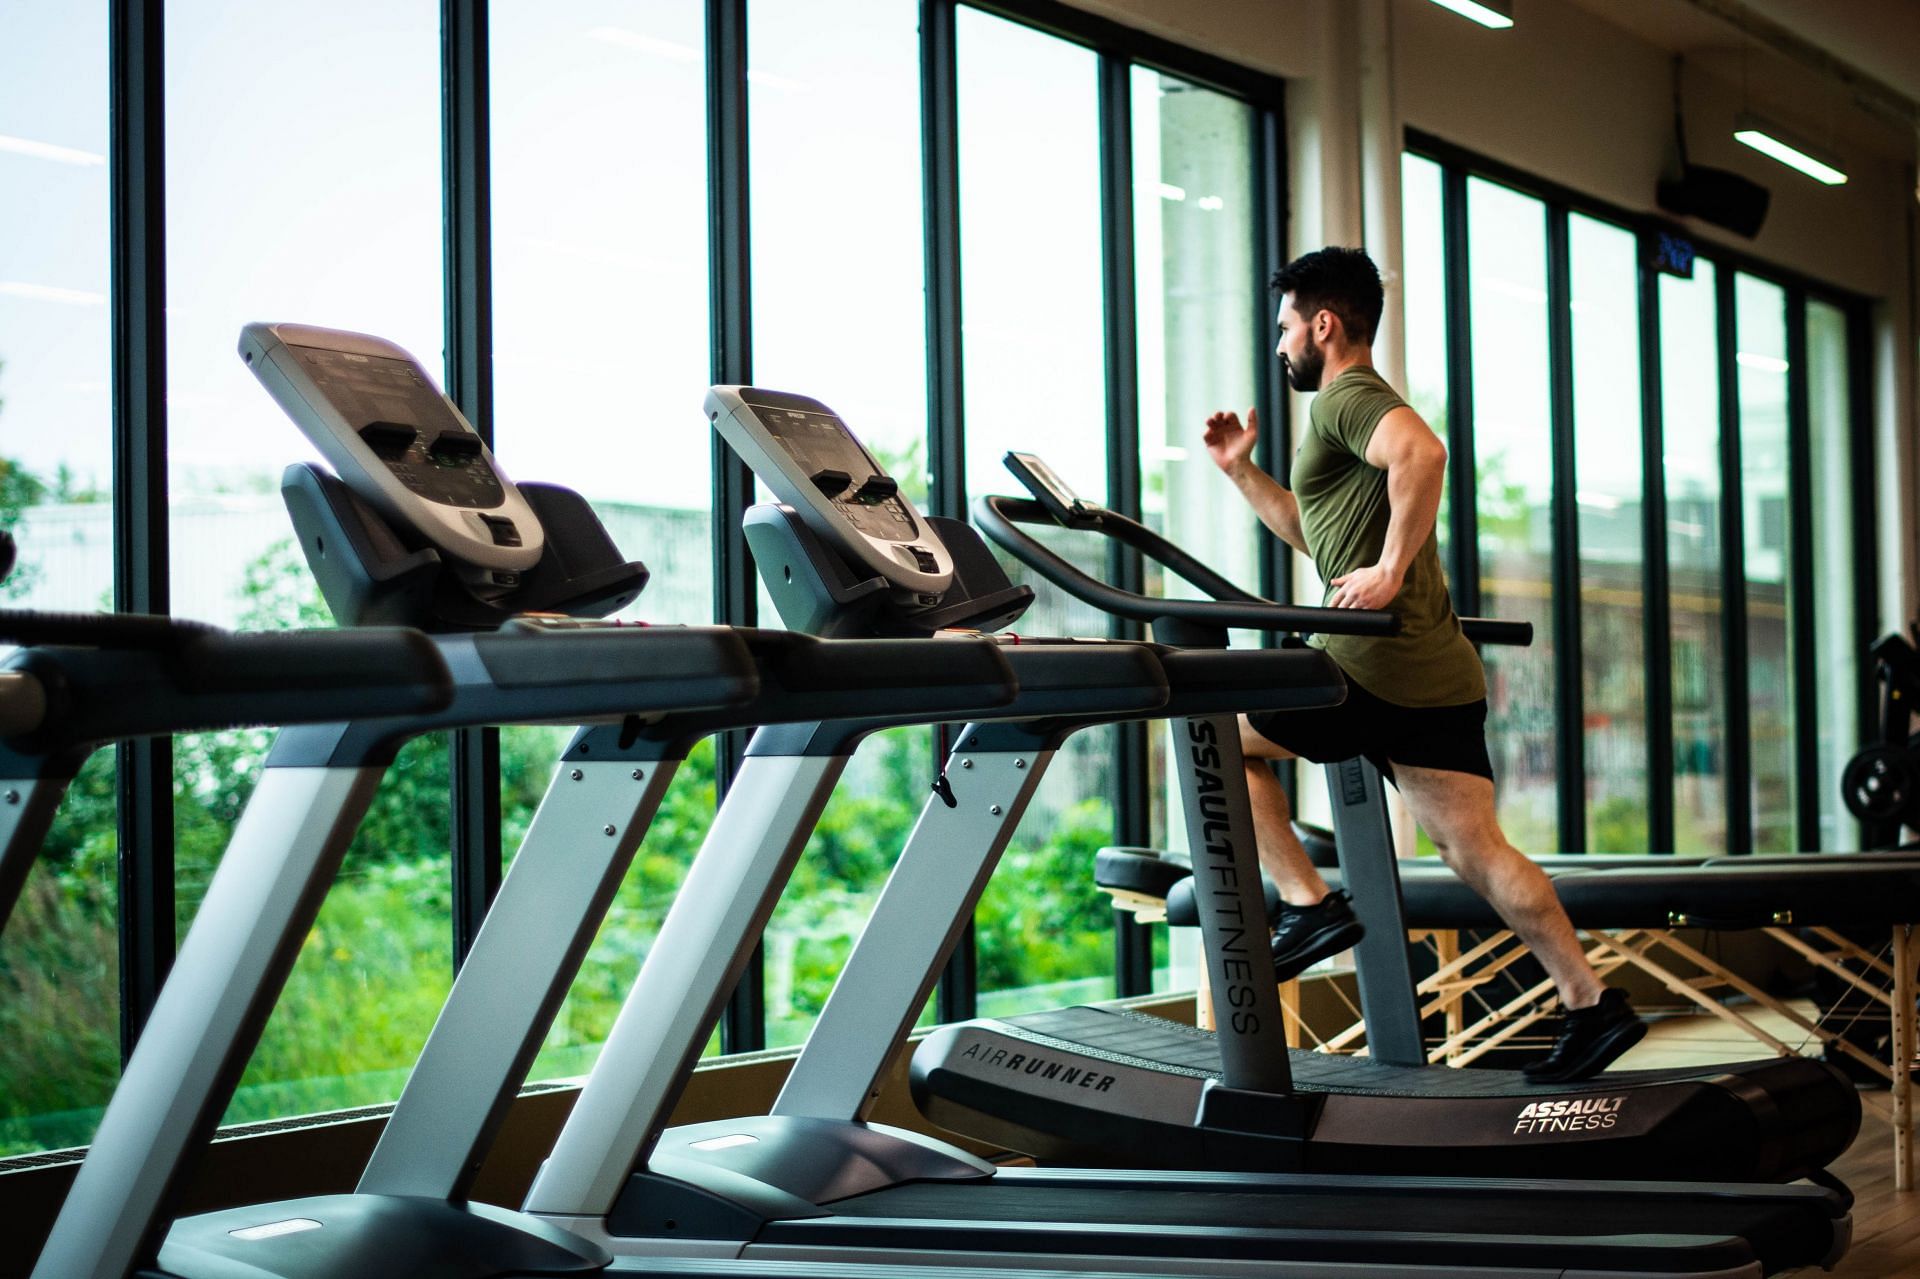 Walking on a treadmill everyday offers benefits like better sleep, digestion and energy levels (Image via Pexels @William Choquette)